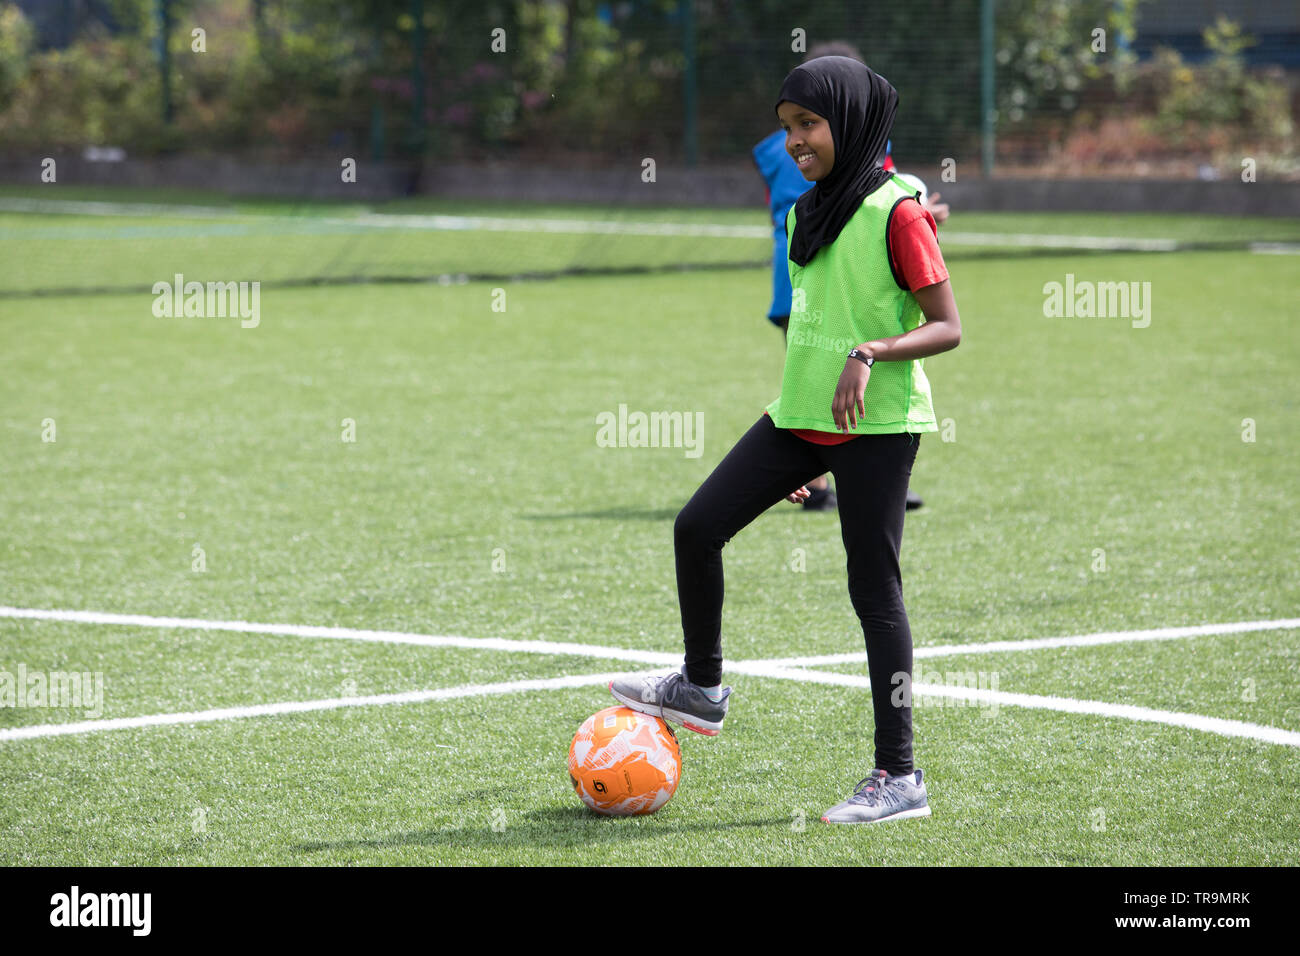 Child kicking ball and girl High Resolution Stock Photography and Images -  Alamy